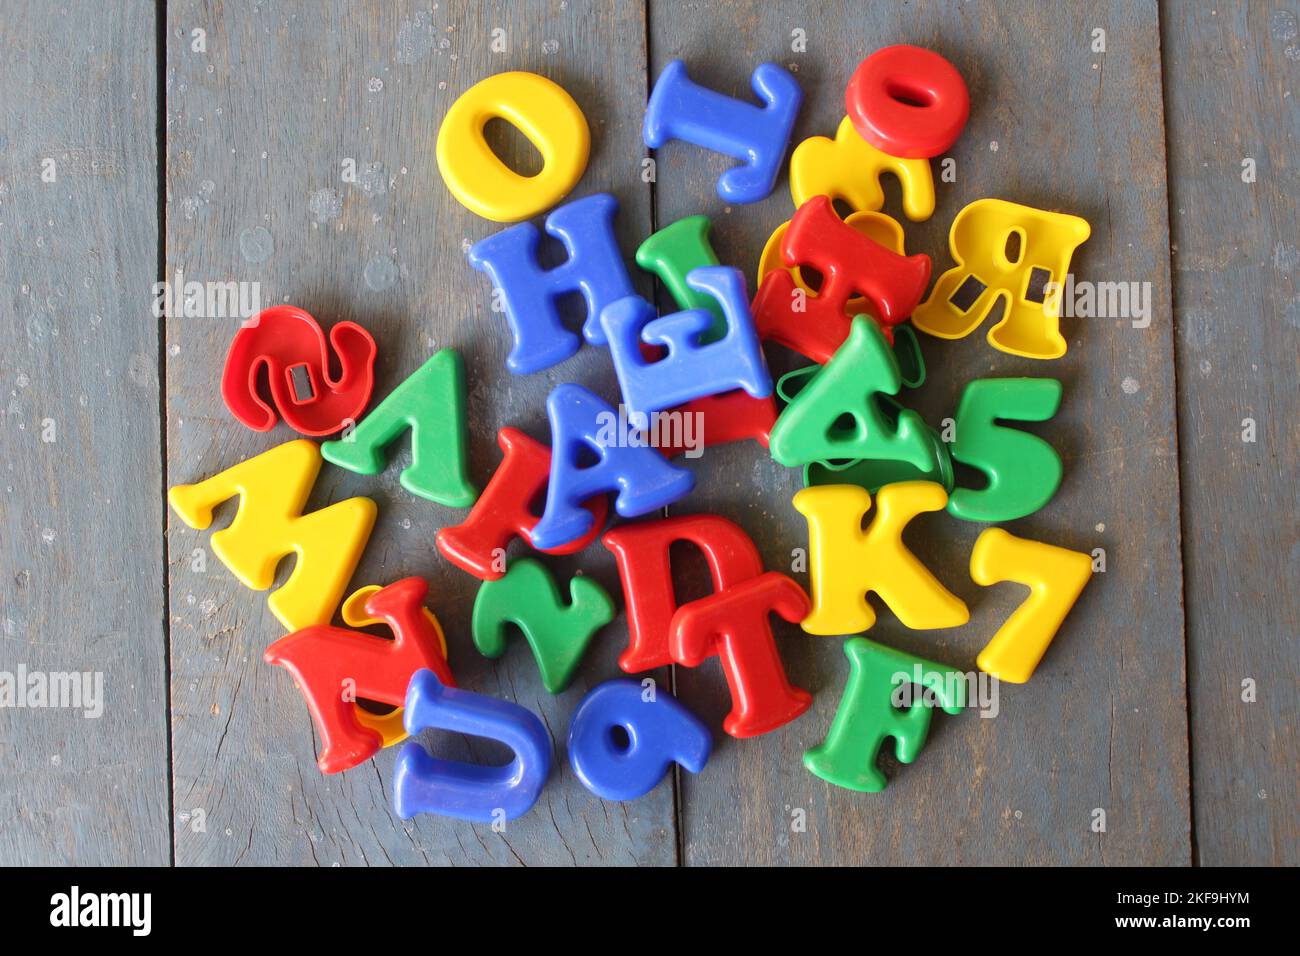 color alphabet text stock images Stock Photo